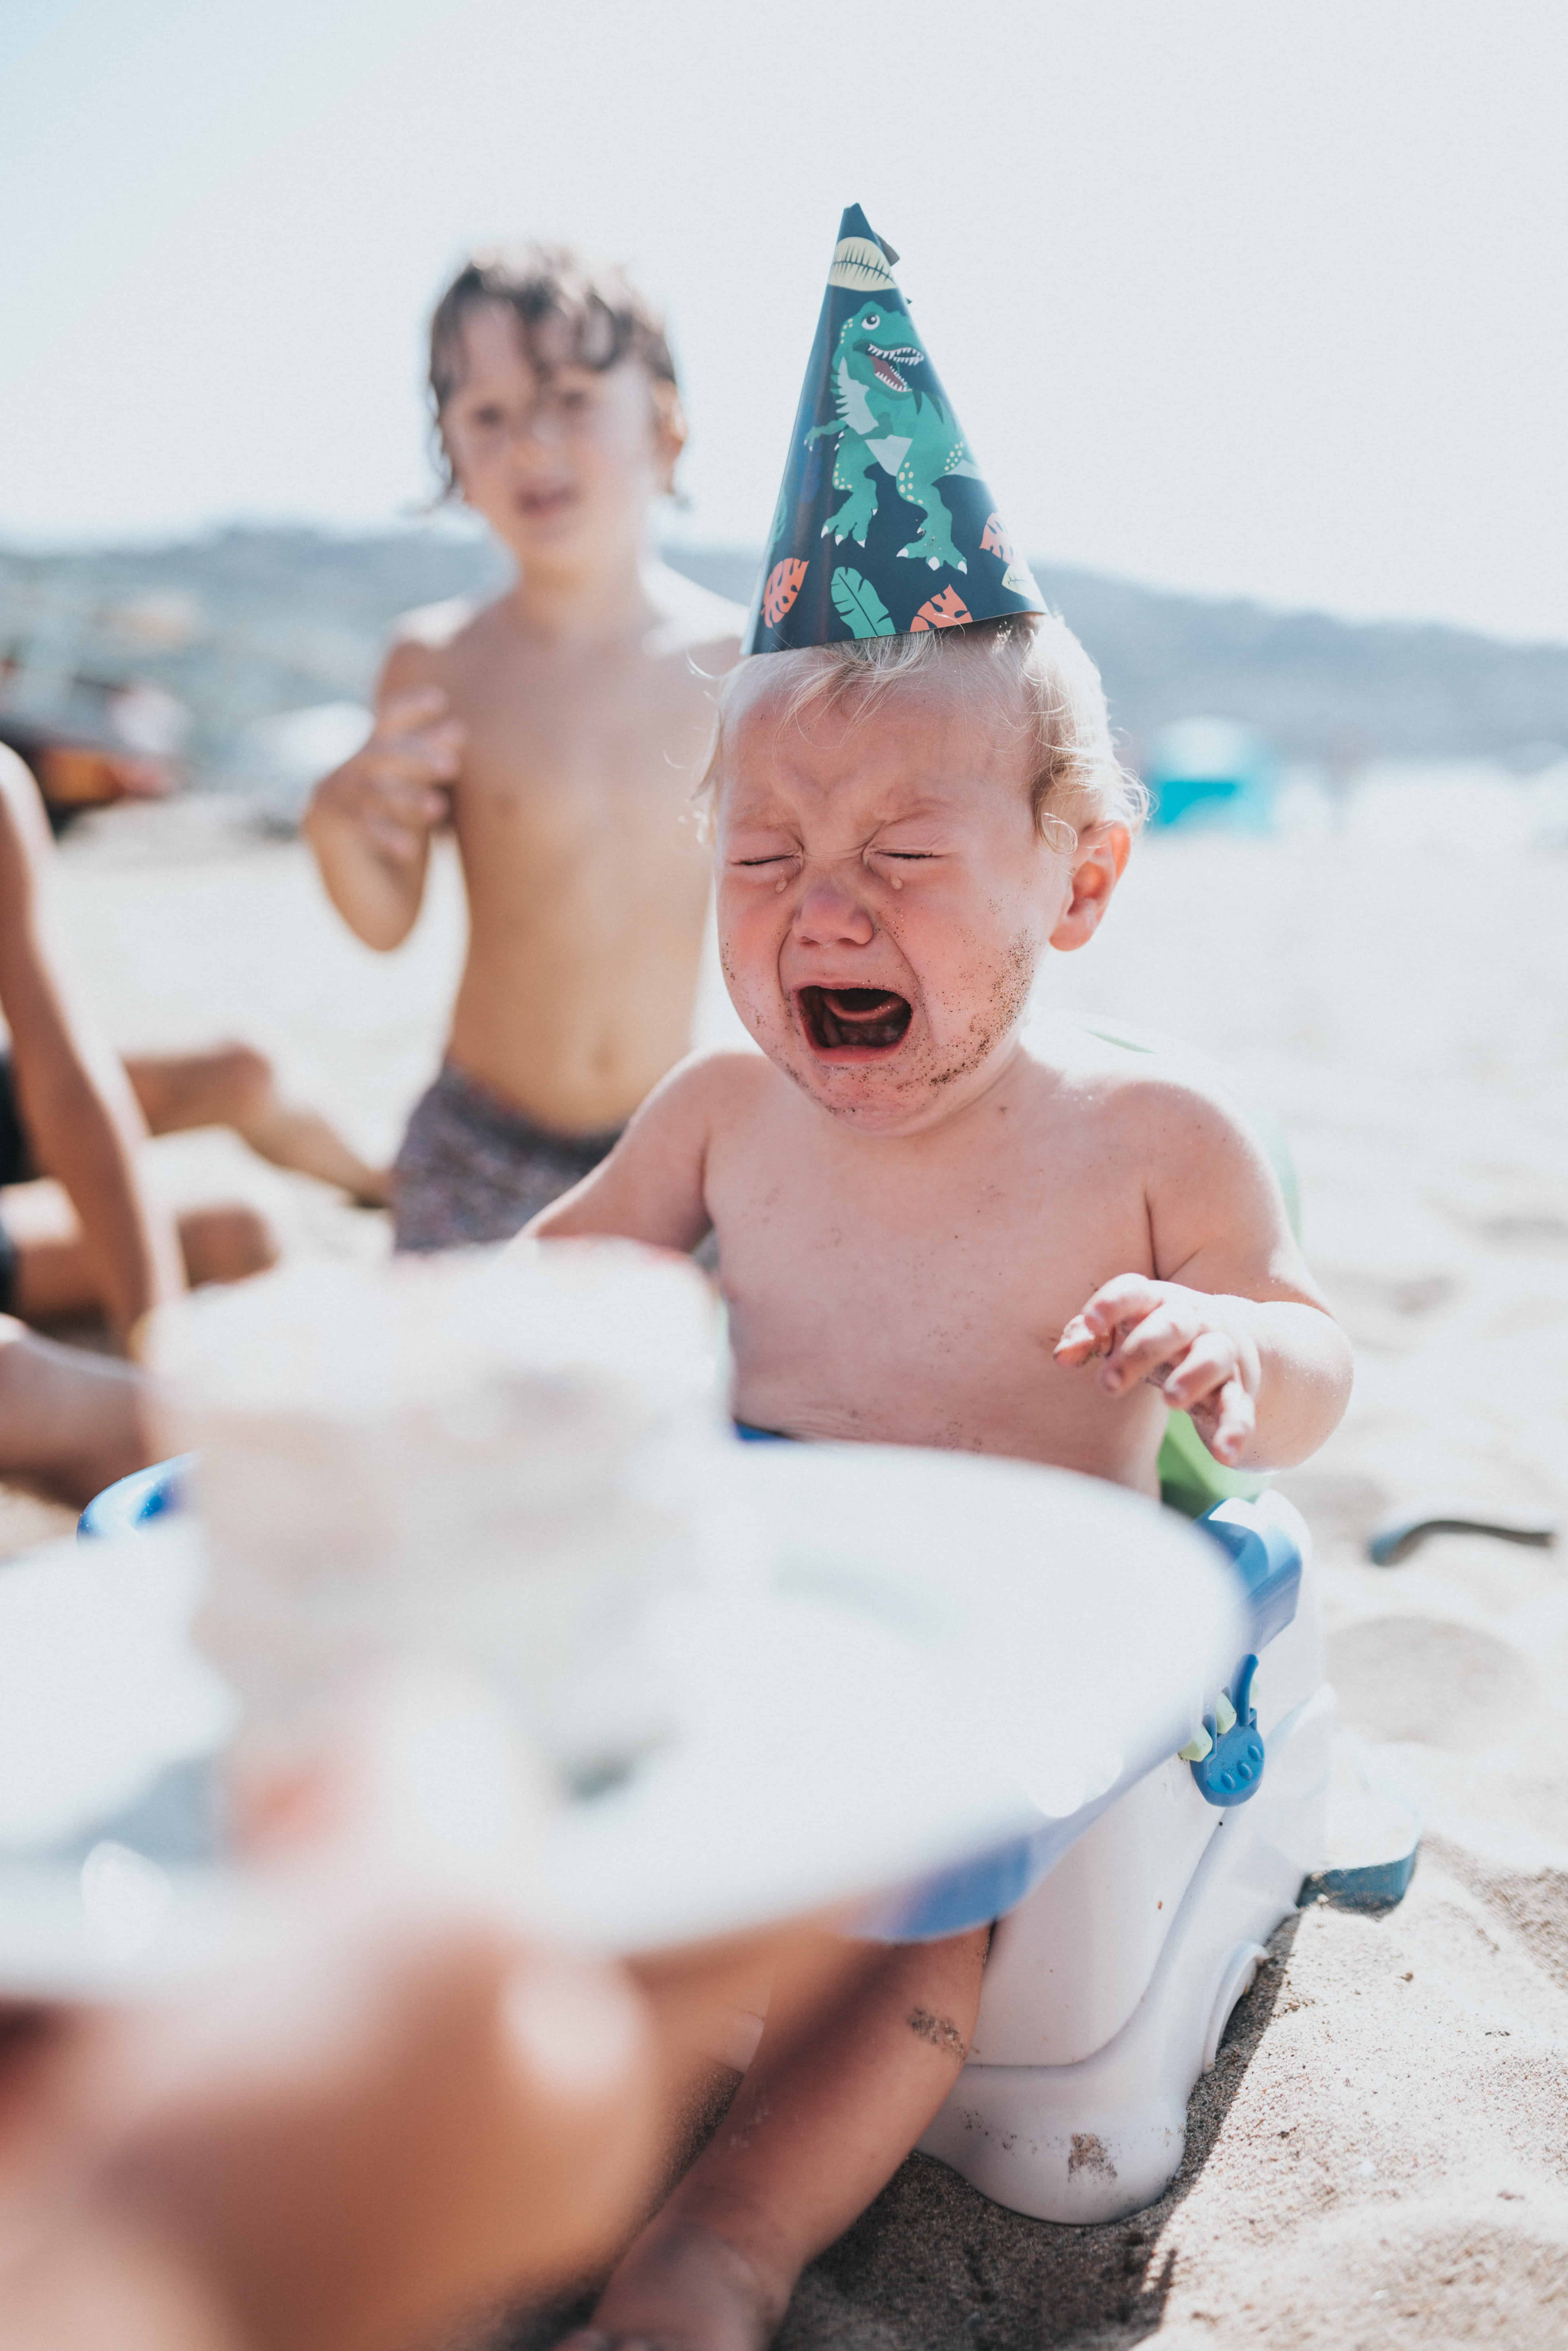 Child on a beach in a party hat crying